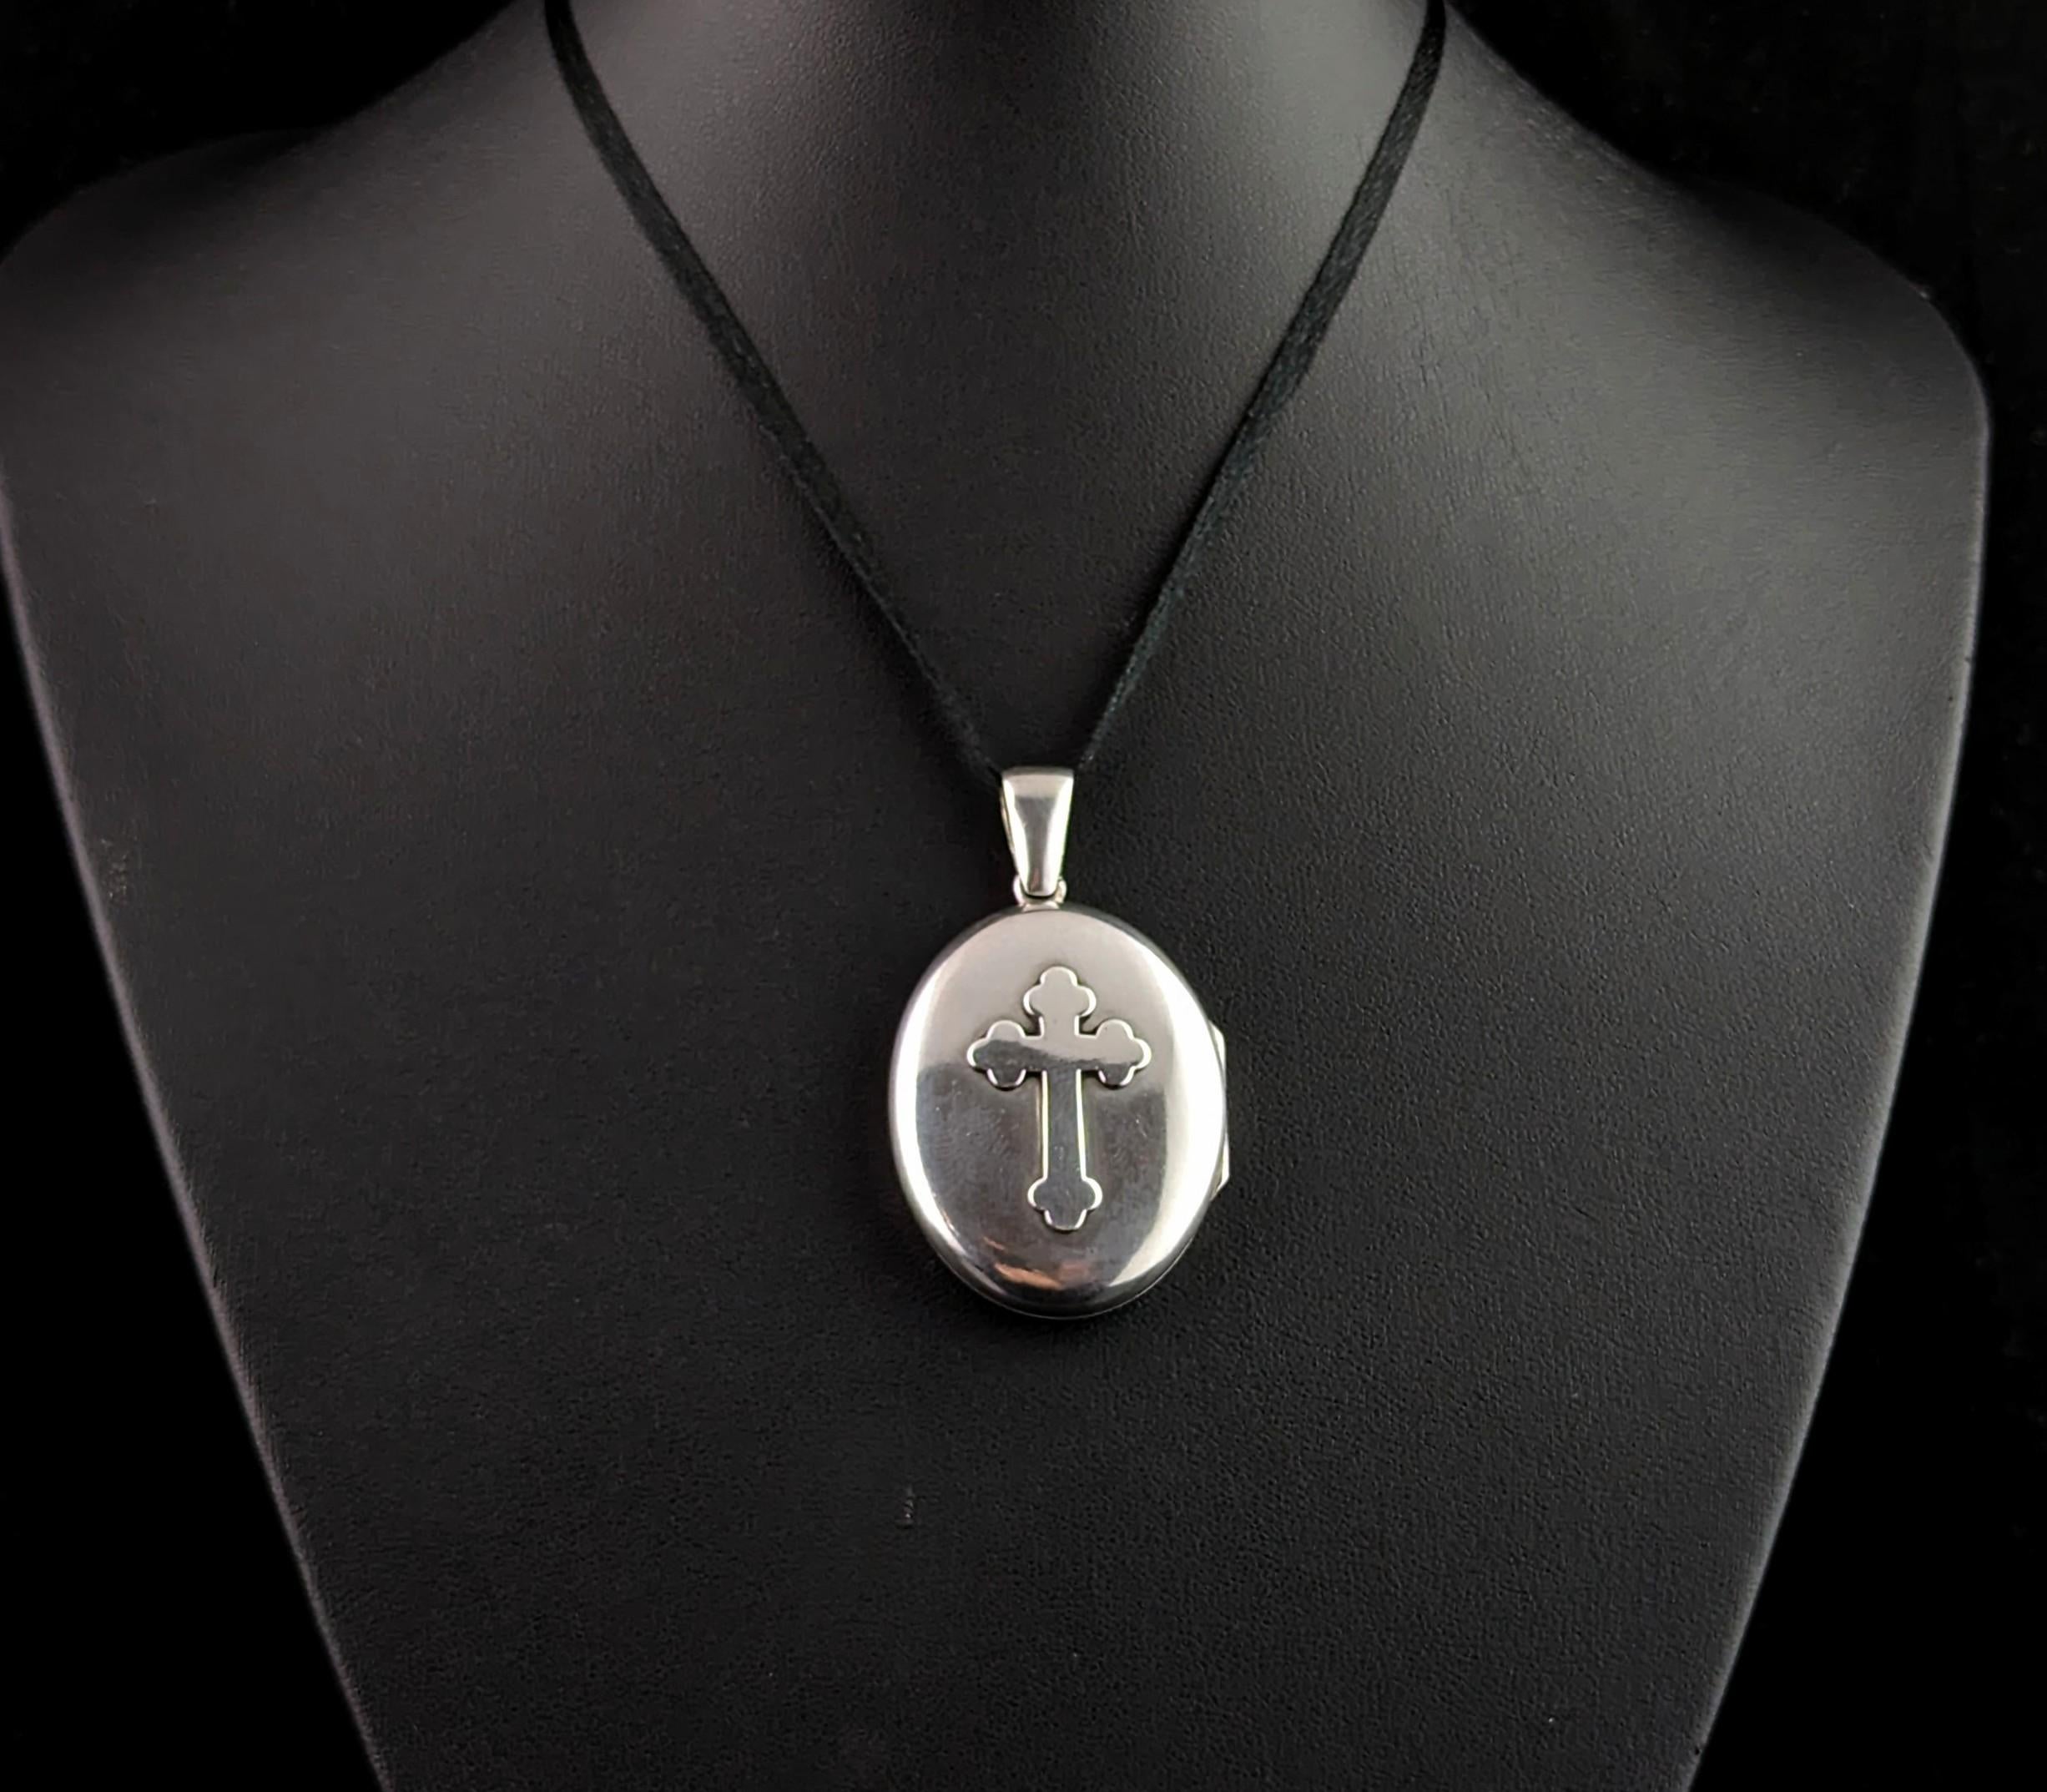 This antique Victorian sterling silver locket is truly unique and incredibly beautiful.

This locket is an oval shaped locket with smooth polished sides, one side has cross design in a low relief design and the other has an engraved monogram in